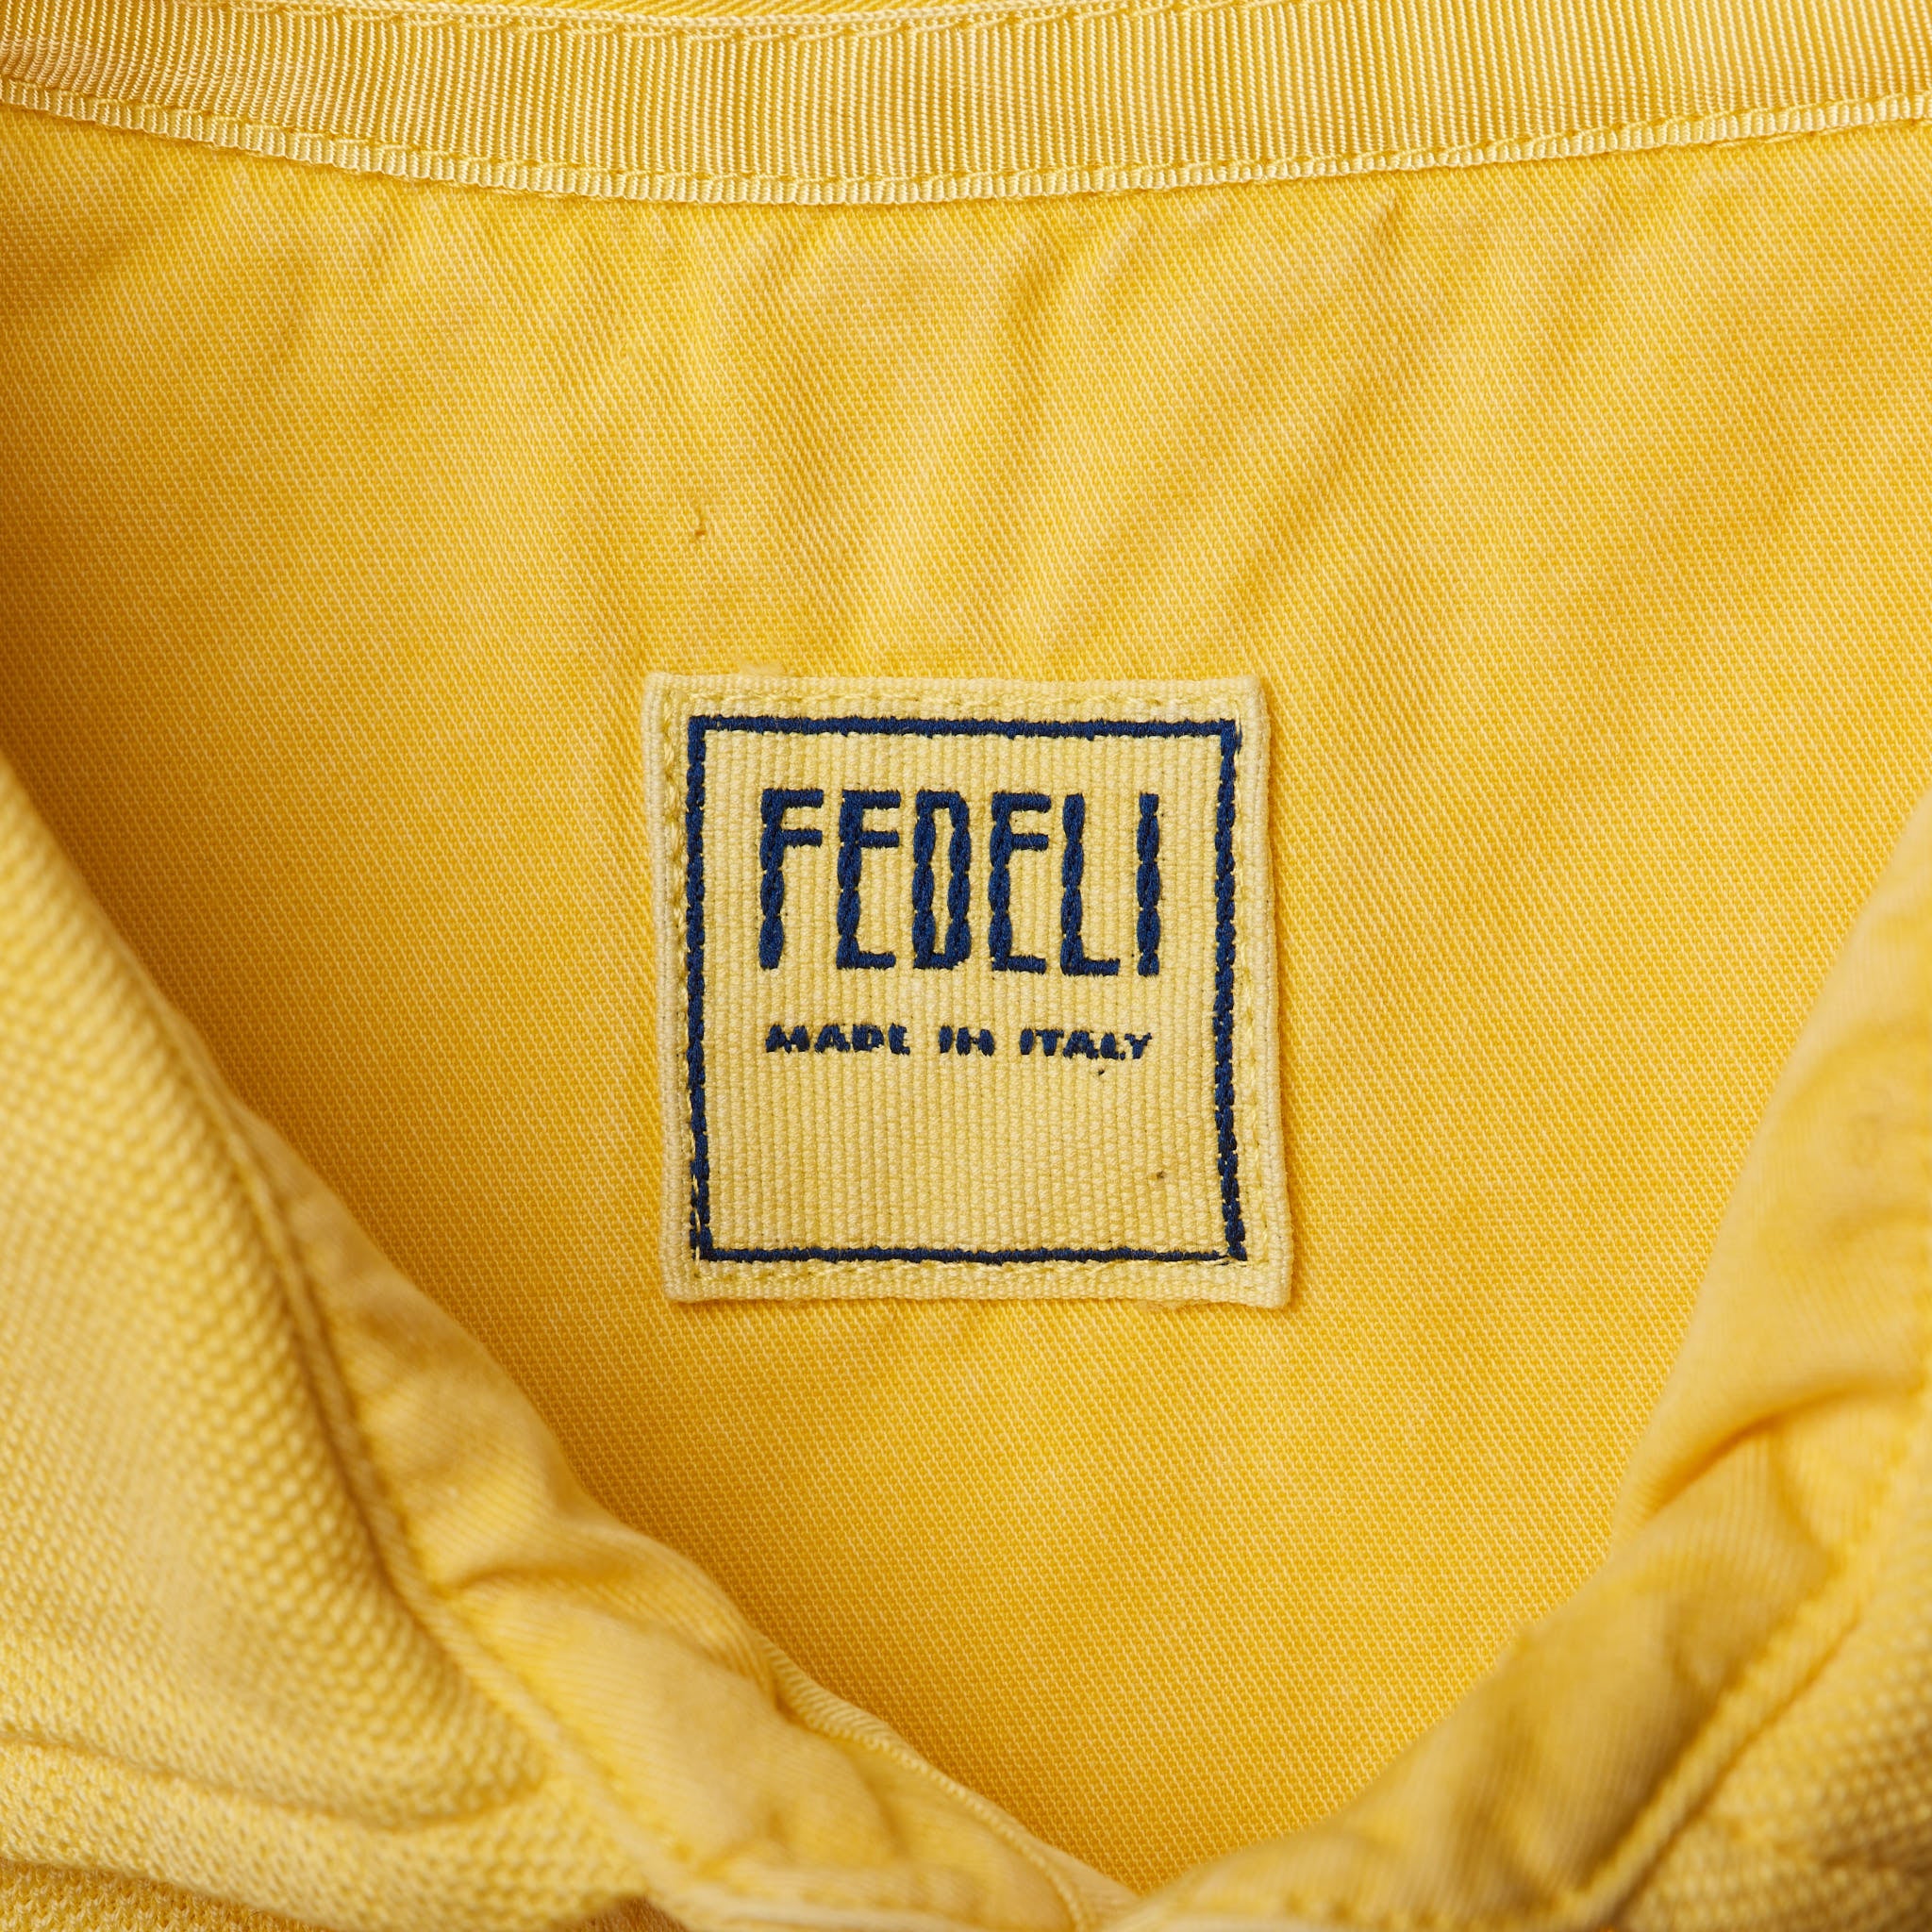 FEDELI Solid Yellow Cotton Pique Frosted Short Sleeve Polo Shirt EU 48 NEW US S